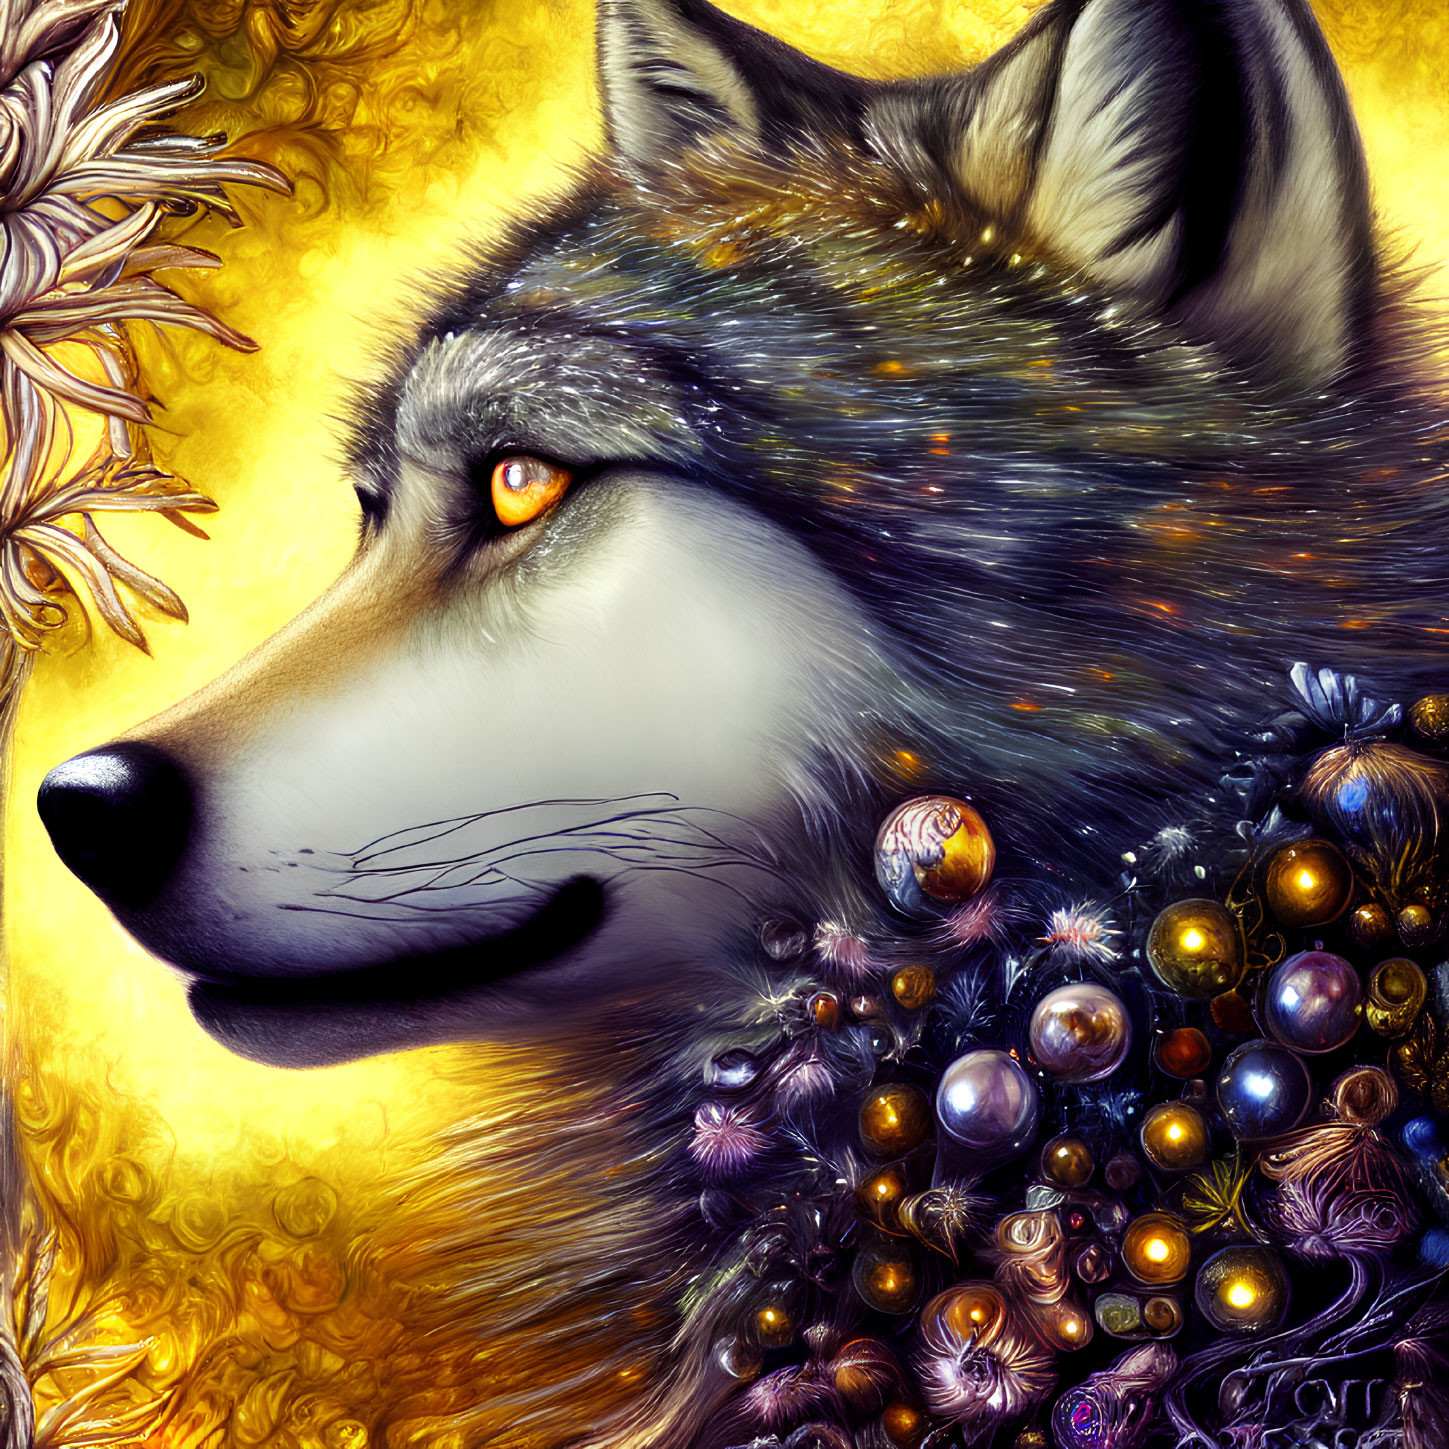 Colorful Wolf Head Artwork with Beads and Feathers on Golden Floral Background